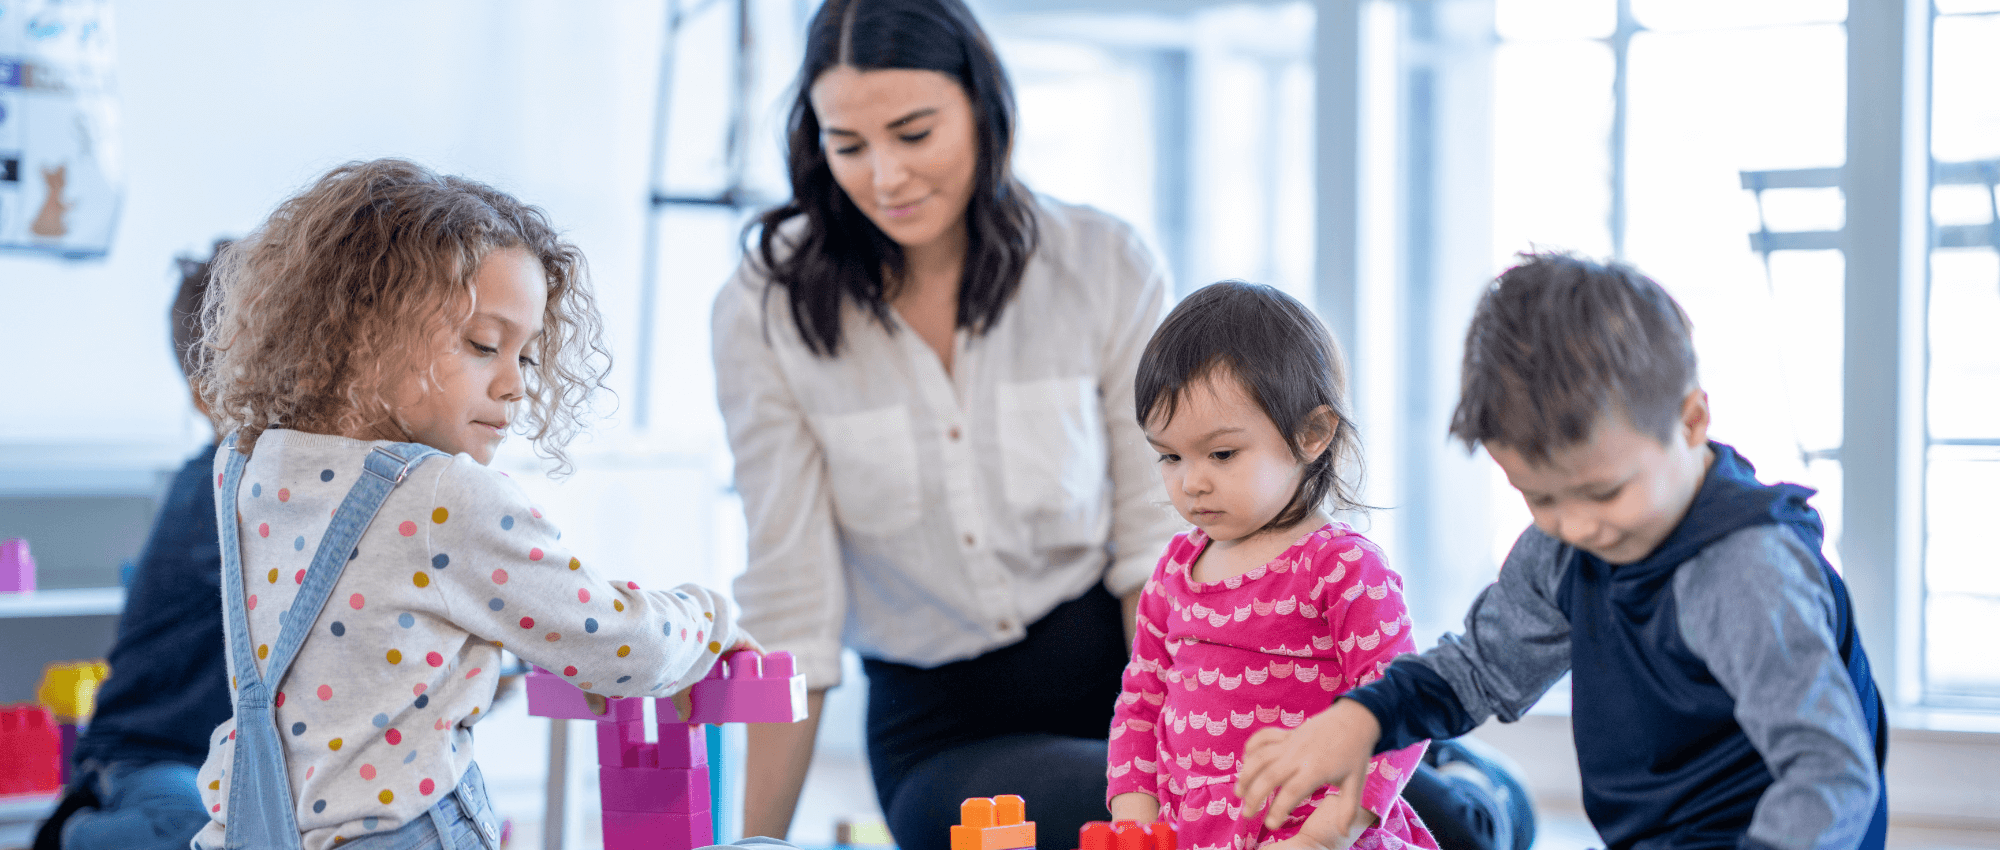 woman with young children in childcare